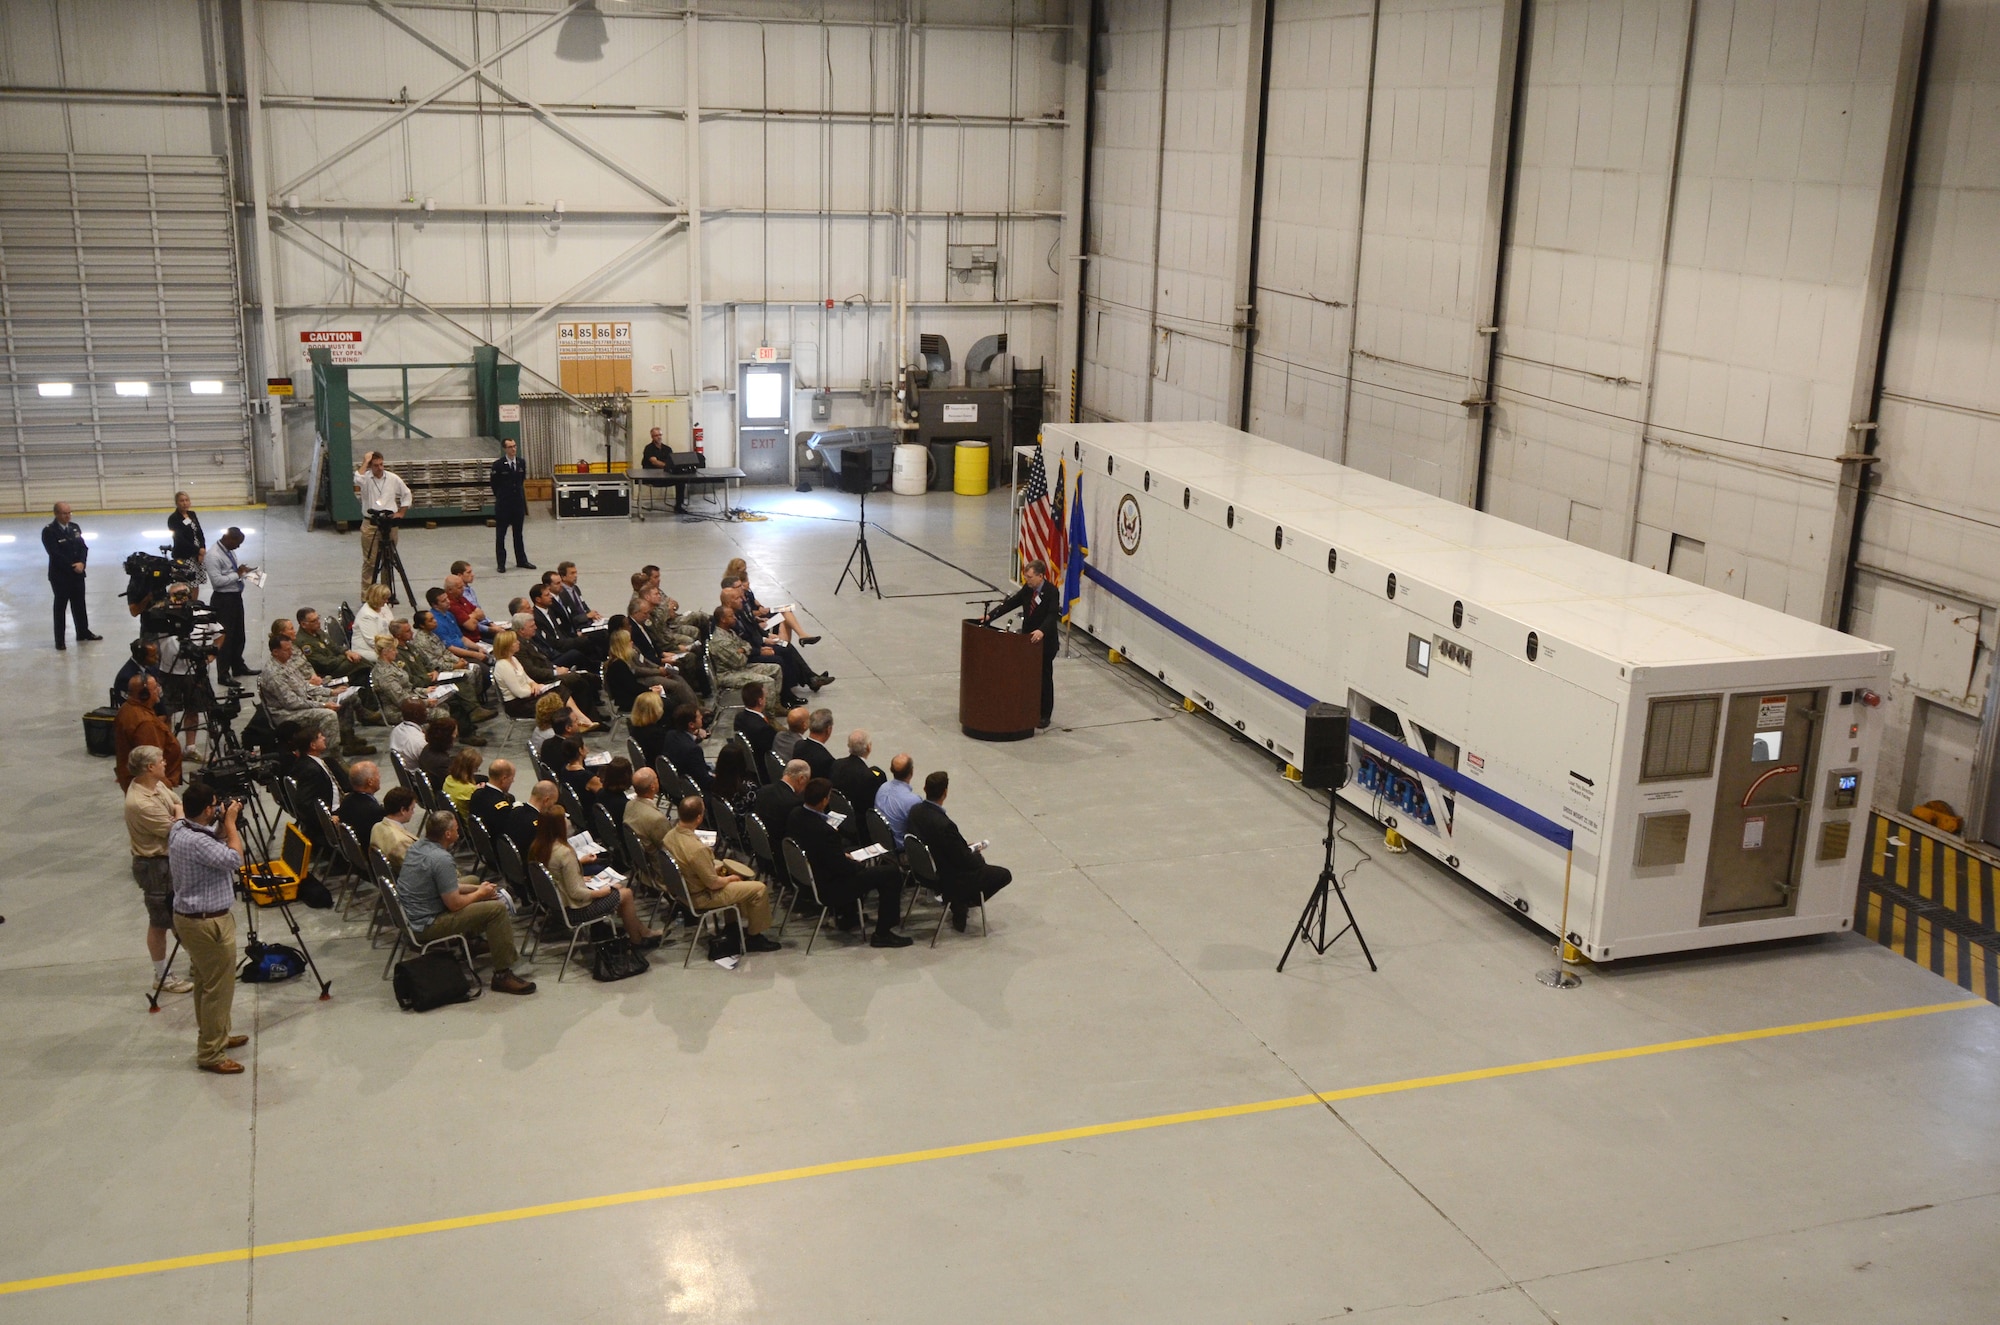 Patrick Kennedy, Under Secretary of Management from the United States Department of State, addresses an audience of personnel from the Department of State, MRI Global, Paul Allen Foundation and members of the 94th Airlift Wing at an unveiling of the DOS Containerized Biocontainment System held at Dobbins Air Reserve Base, Ga. Aug. 11, 2015. (U.S. Air Force photo/Don Peek)